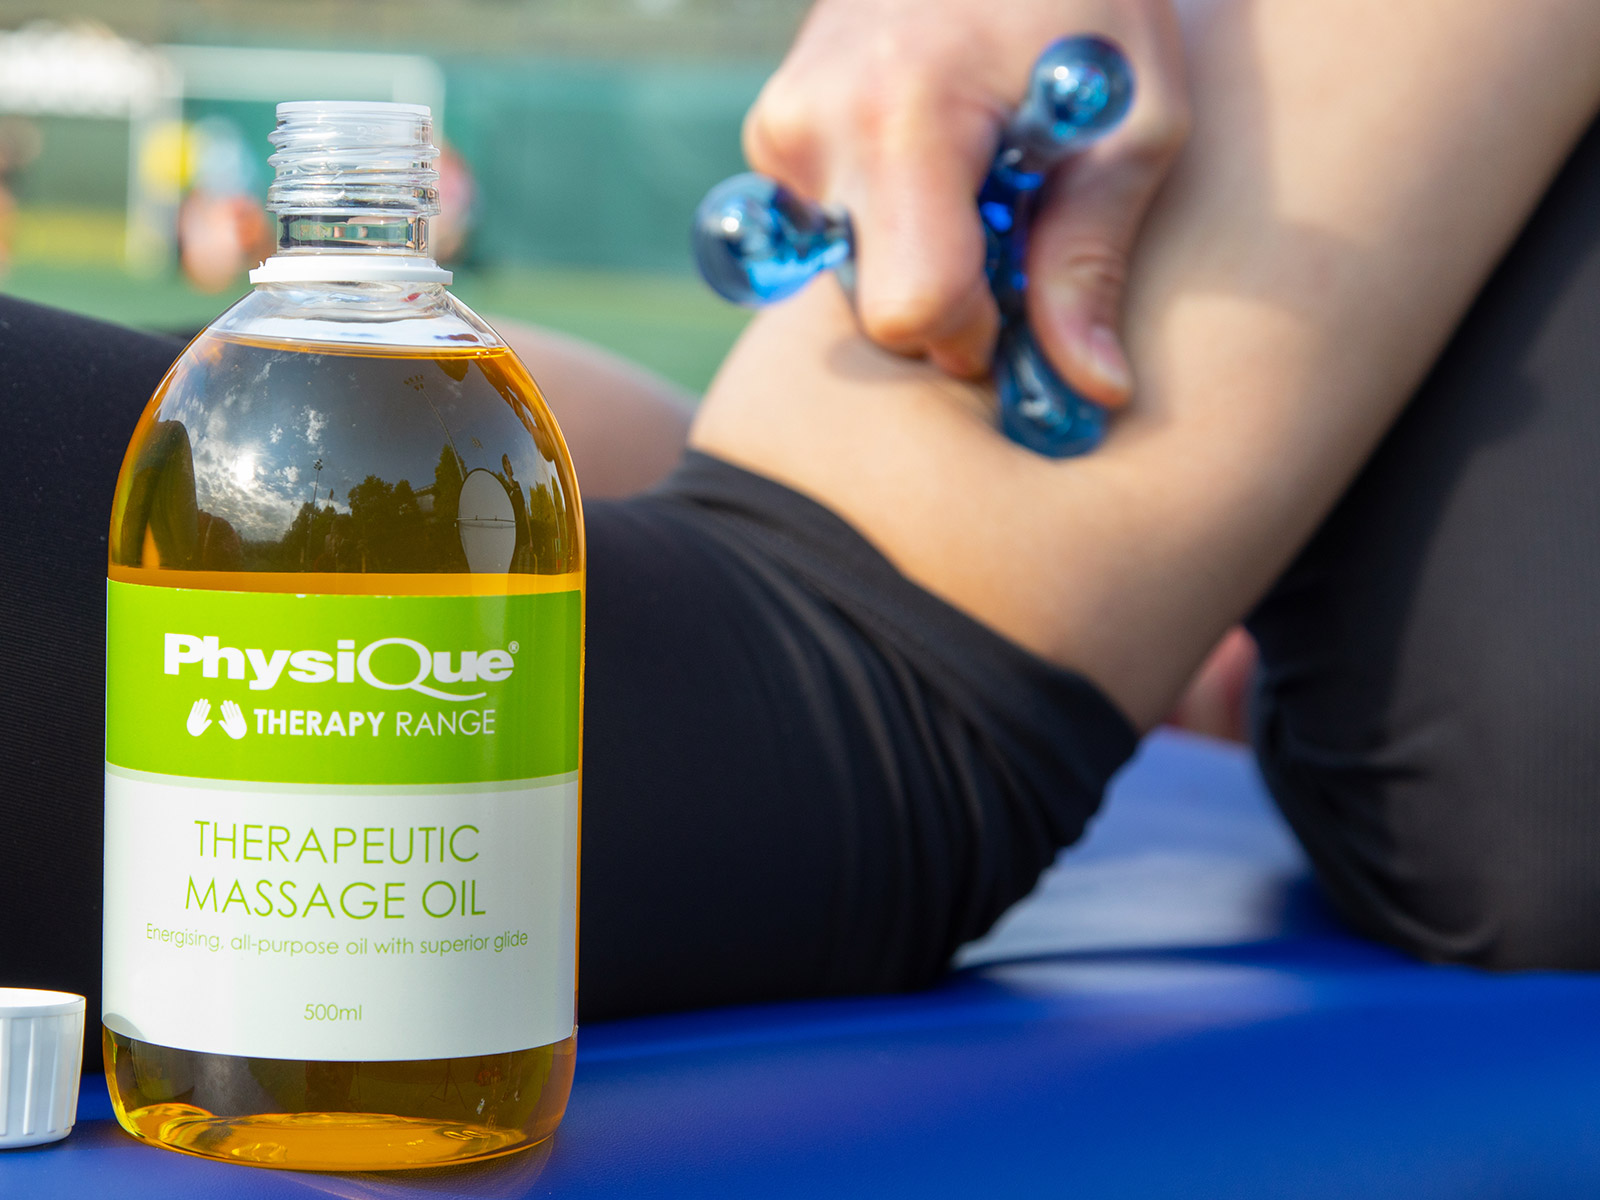 Physique Therapeutical Massage Oil 500ml 003